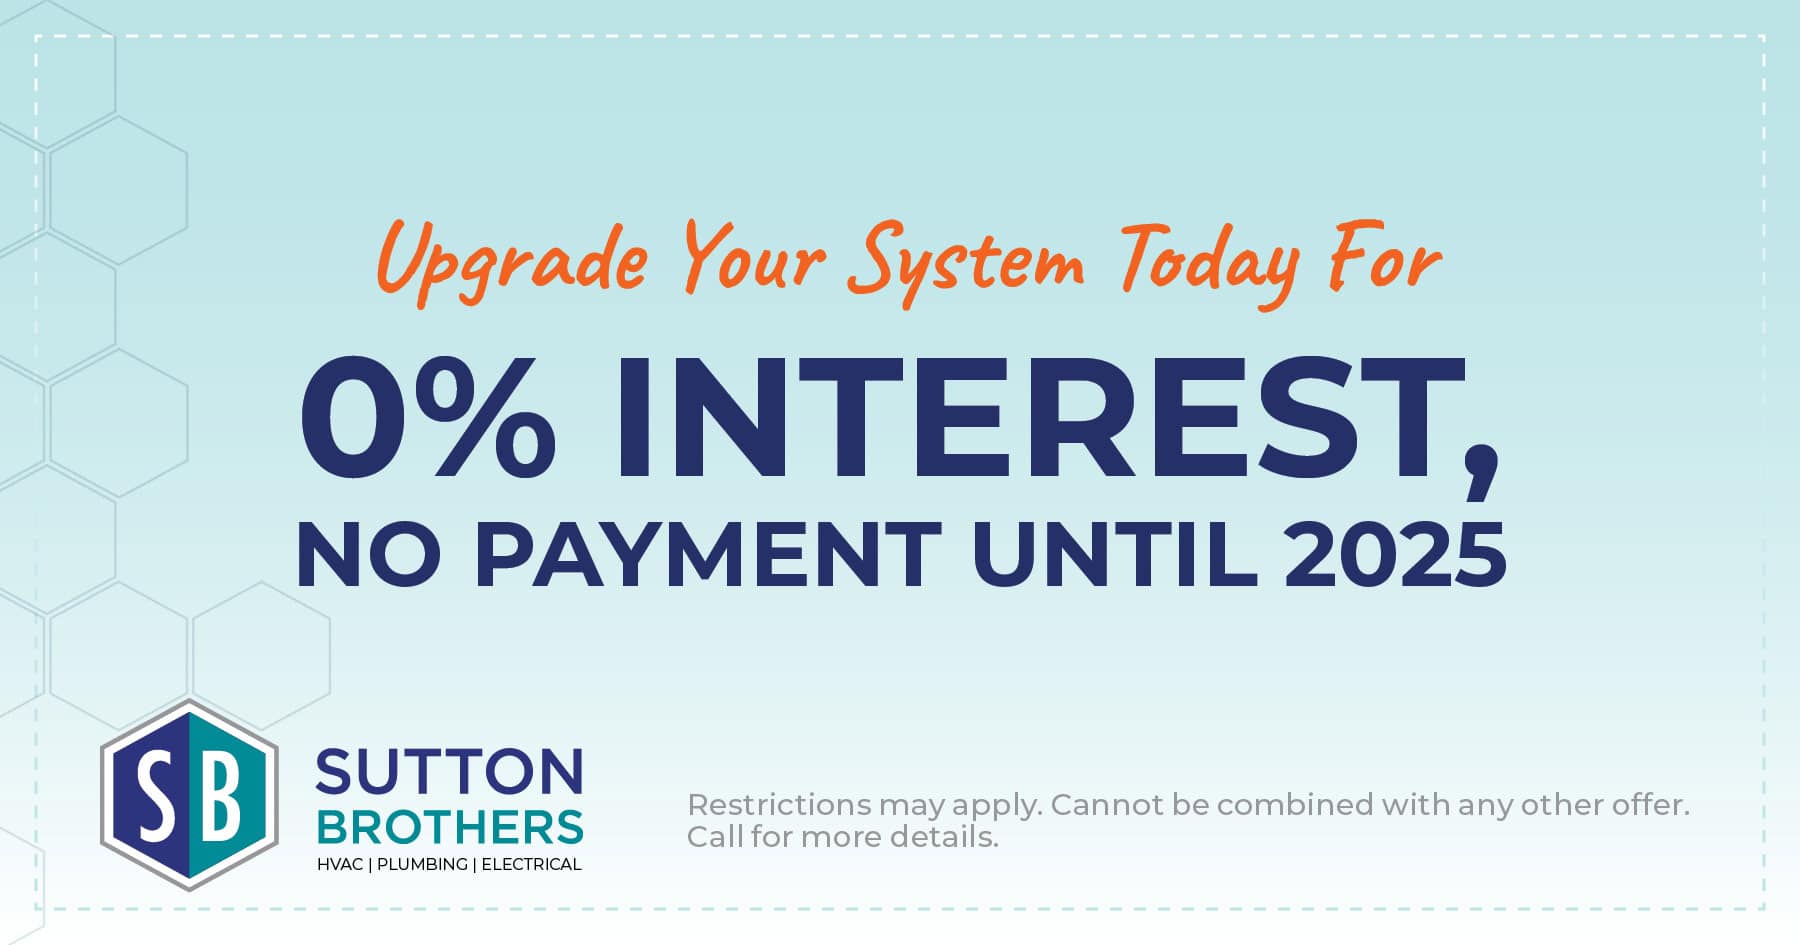 Upgrade your system today for 0% interest, no payment until 2025.